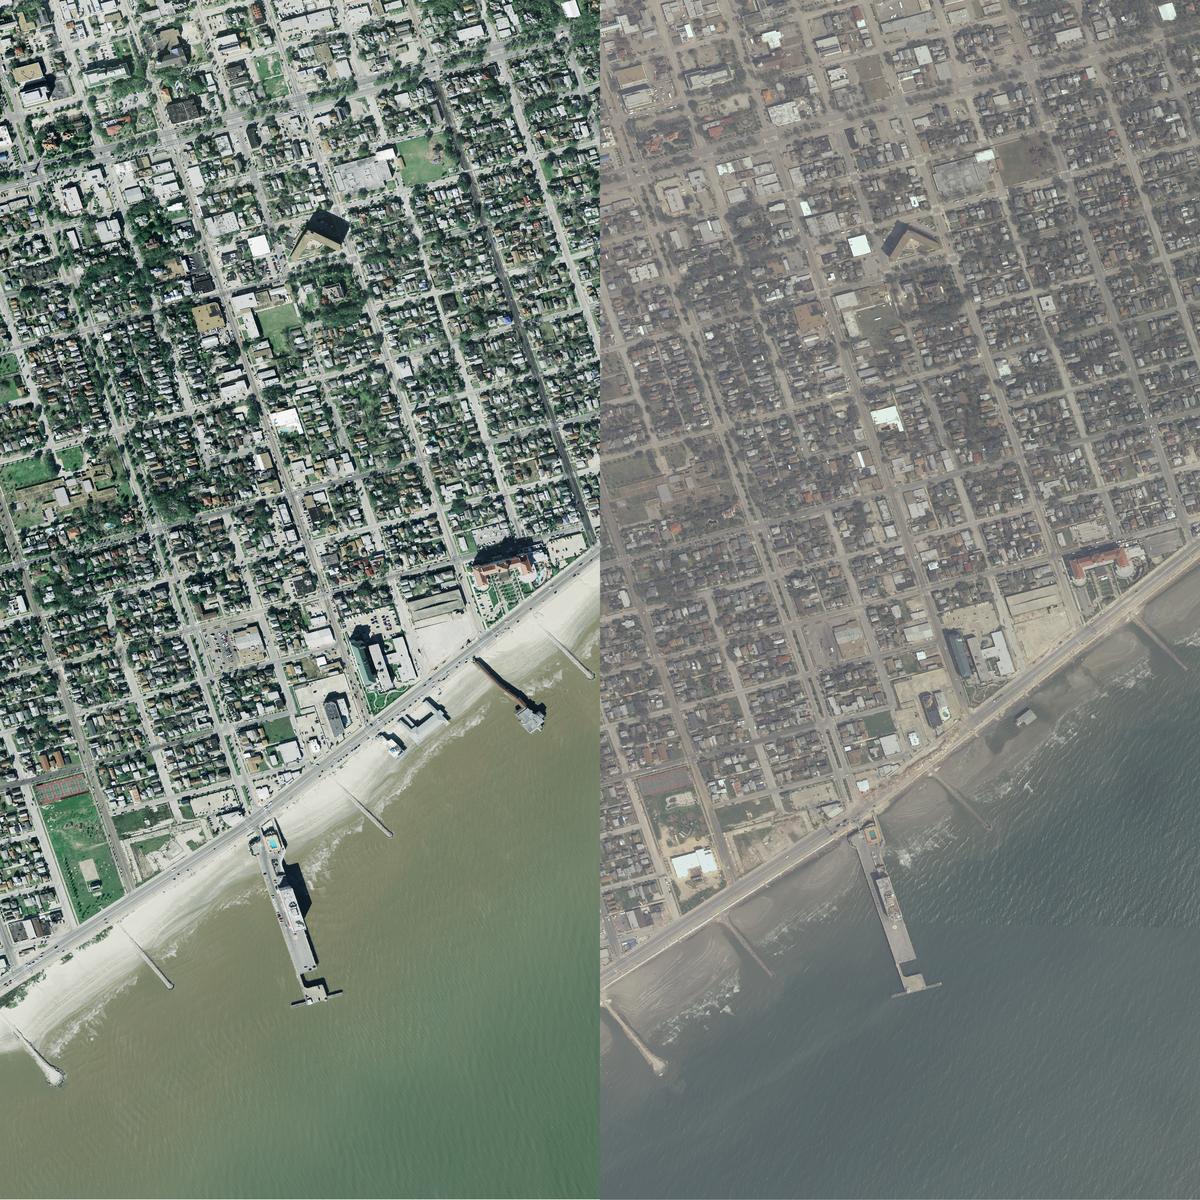 Image of the Week - Before and After Hurricane Ike